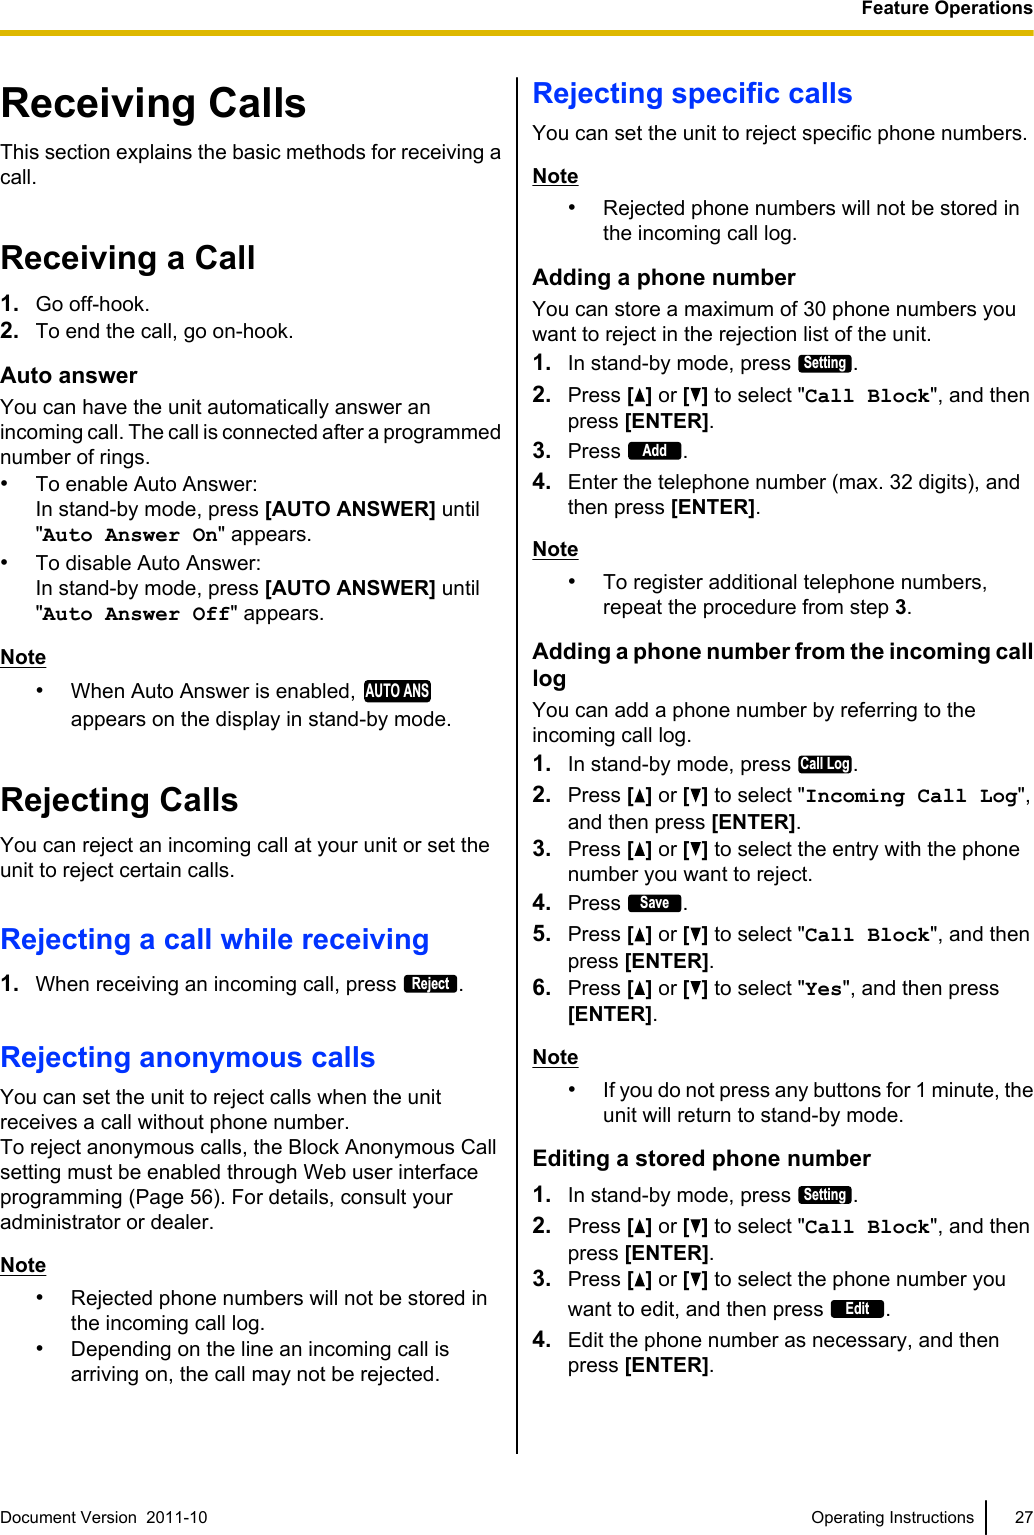 Receiving CallsThis section explains the basic methods for receiving acall.Receiving a Call1. Go off-hook.2. To end the call, go on-hook.Auto answerYou can have the unit automatically answer anincoming call. The call is connected after a programmednumber of rings.•To enable Auto Answer:In stand-by mode, press [AUTO ANSWER] until&quot;Auto Answer On&quot; appears.•To disable Auto Answer:In stand-by mode, press [AUTO ANSWER] until&quot;Auto Answer Off&quot; appears.Note•When Auto Answer is enabled, AUTO ANSappears on the display in stand-by mode.Rejecting CallsYou can reject an incoming call at your unit or set theunit to reject certain calls.Rejecting a call while receiving1. When receiving an incoming call, press Reject.Rejecting anonymous callsYou can set the unit to reject calls when the unitreceives a call without phone number.To reject anonymous calls, the Block Anonymous Callsetting must be enabled through Web user interfaceprogramming (Page 56). For details, consult youradministrator or dealer.Note•Rejected phone numbers will not be stored inthe incoming call log.•Depending on the line an incoming call isarriving on, the call may not be rejected.Rejecting specific callsYou can set the unit to reject specific phone numbers.Note•Rejected phone numbers will not be stored inthe incoming call log.Adding a phone numberYou can store a maximum of 30 phone numbers youwant to reject in the rejection list of the unit.1. In stand-by mode, press Setting.2. Press [] or [ ] to select &quot;Call Block&quot;, and thenpress [ENTER].3. Press Add.4. Enter the telephone number (max. 32 digits), andthen press [ENTER].Note•To register additional telephone numbers,repeat the procedure from step 3.Adding a phone number from the incoming calllogYou can add a phone number by referring to theincoming call log.1. In stand-by mode, press Call Log.2. Press [] or [ ] to select &quot;Incoming Call Log&quot;,and then press [ENTER].3. Press [] or [ ] to select the entry with the phonenumber you want to reject.4. Press Save.5. Press [ ] or [ ] to select &quot;Call Block&quot;, and thenpress [ENTER].6. Press [ ] or [ ] to select &quot;Yes&quot;, and then press[ENTER].Note•If you do not press any buttons for 1 minute, theunit will return to stand-by mode.Editing a stored phone number1. In stand-by mode, press Setting.2. Press [ ] or [ ] to select &quot;Call Block&quot;, and thenpress [ENTER].3. Press [ ] or [ ] to select the phone number youwant to edit, and then press Edit.4. Edit the phone number as necessary, and thenpress [ENTER].Document Version  2011-10   Operating Instructions 27Feature Operations